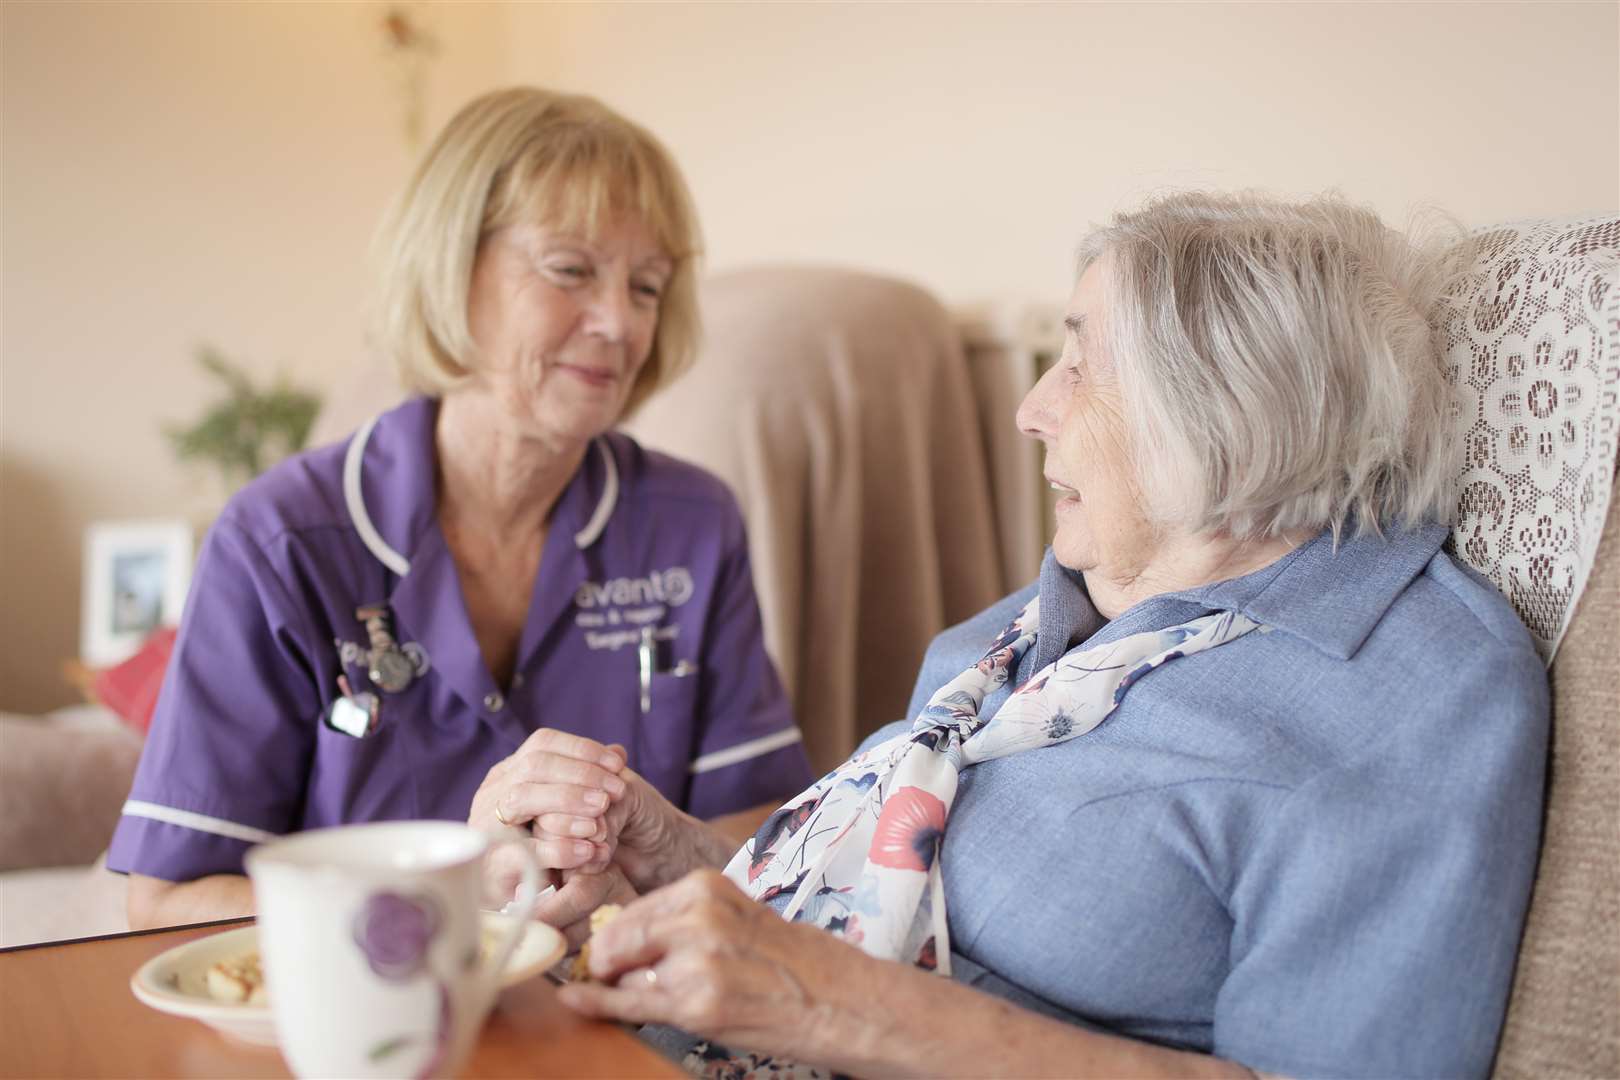 Services include personal care, medication assistance, day to day housework tasks and respite care